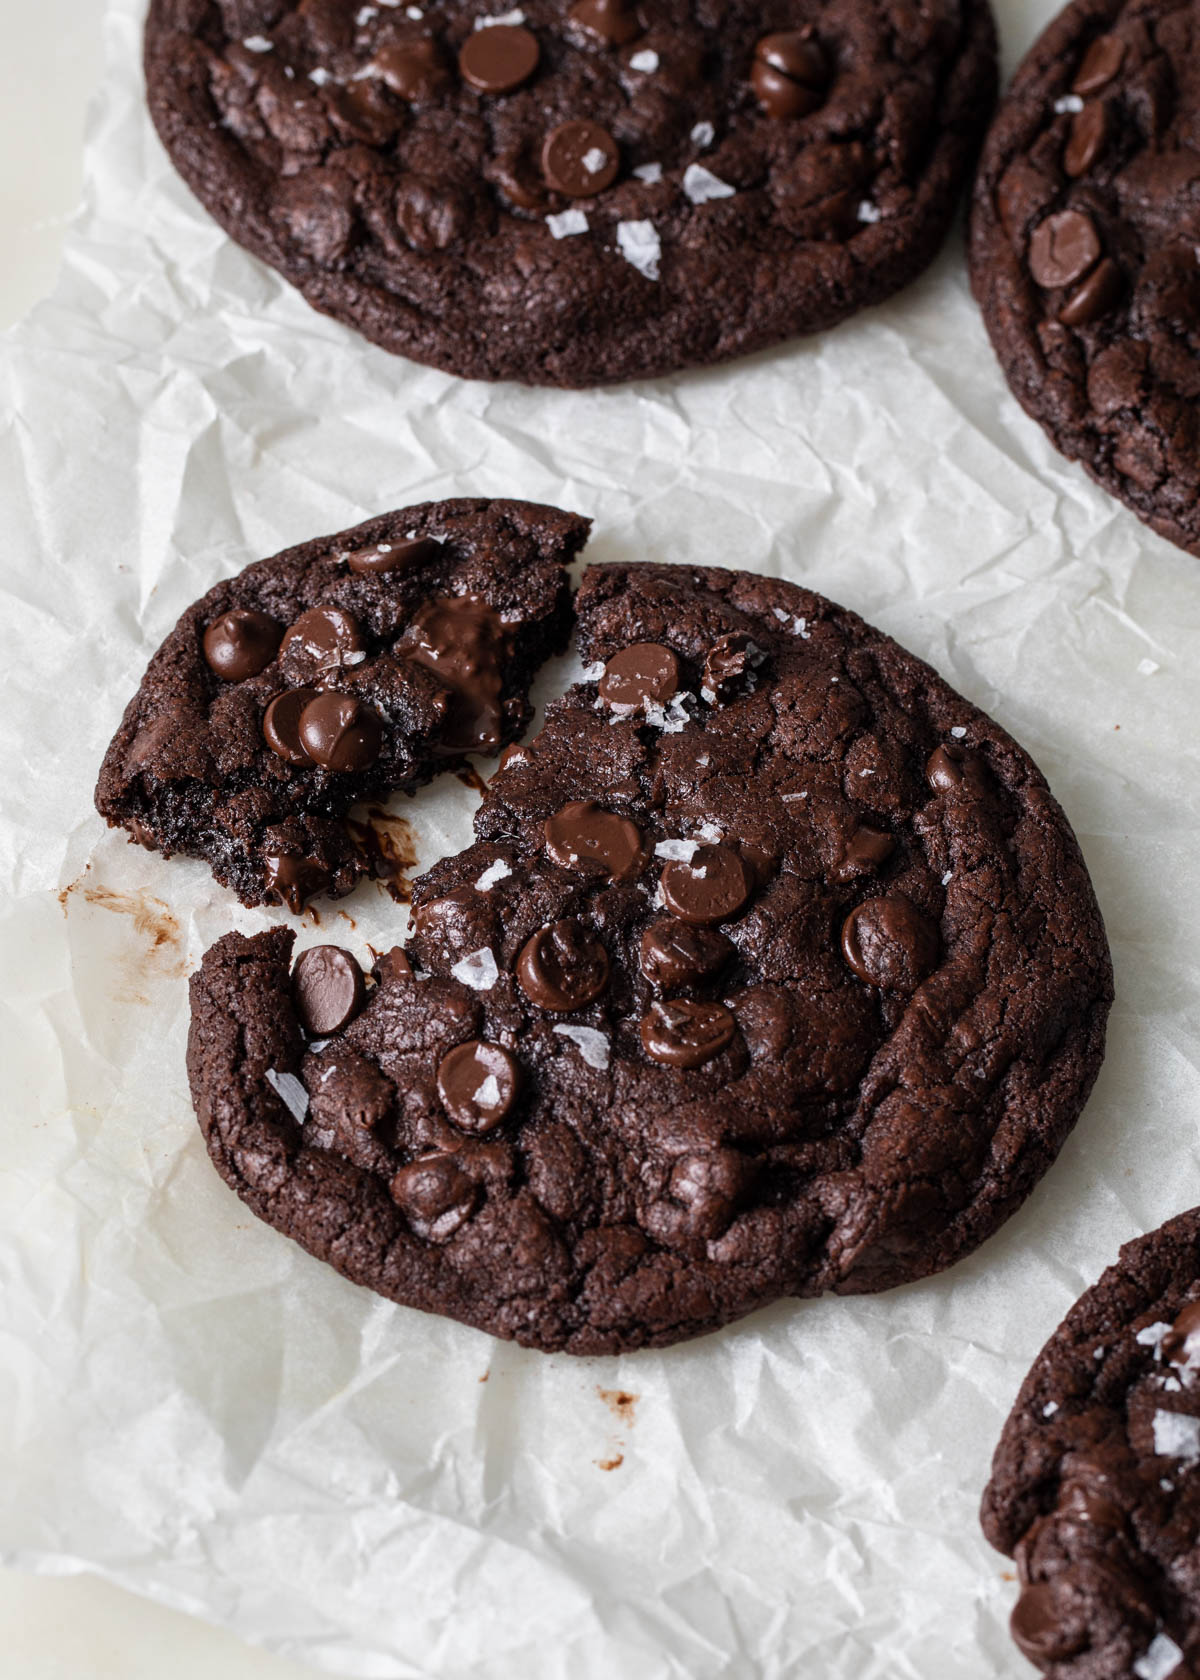 A giant double chocolate chip cookies with melted chocolate chips and flaky sea salt